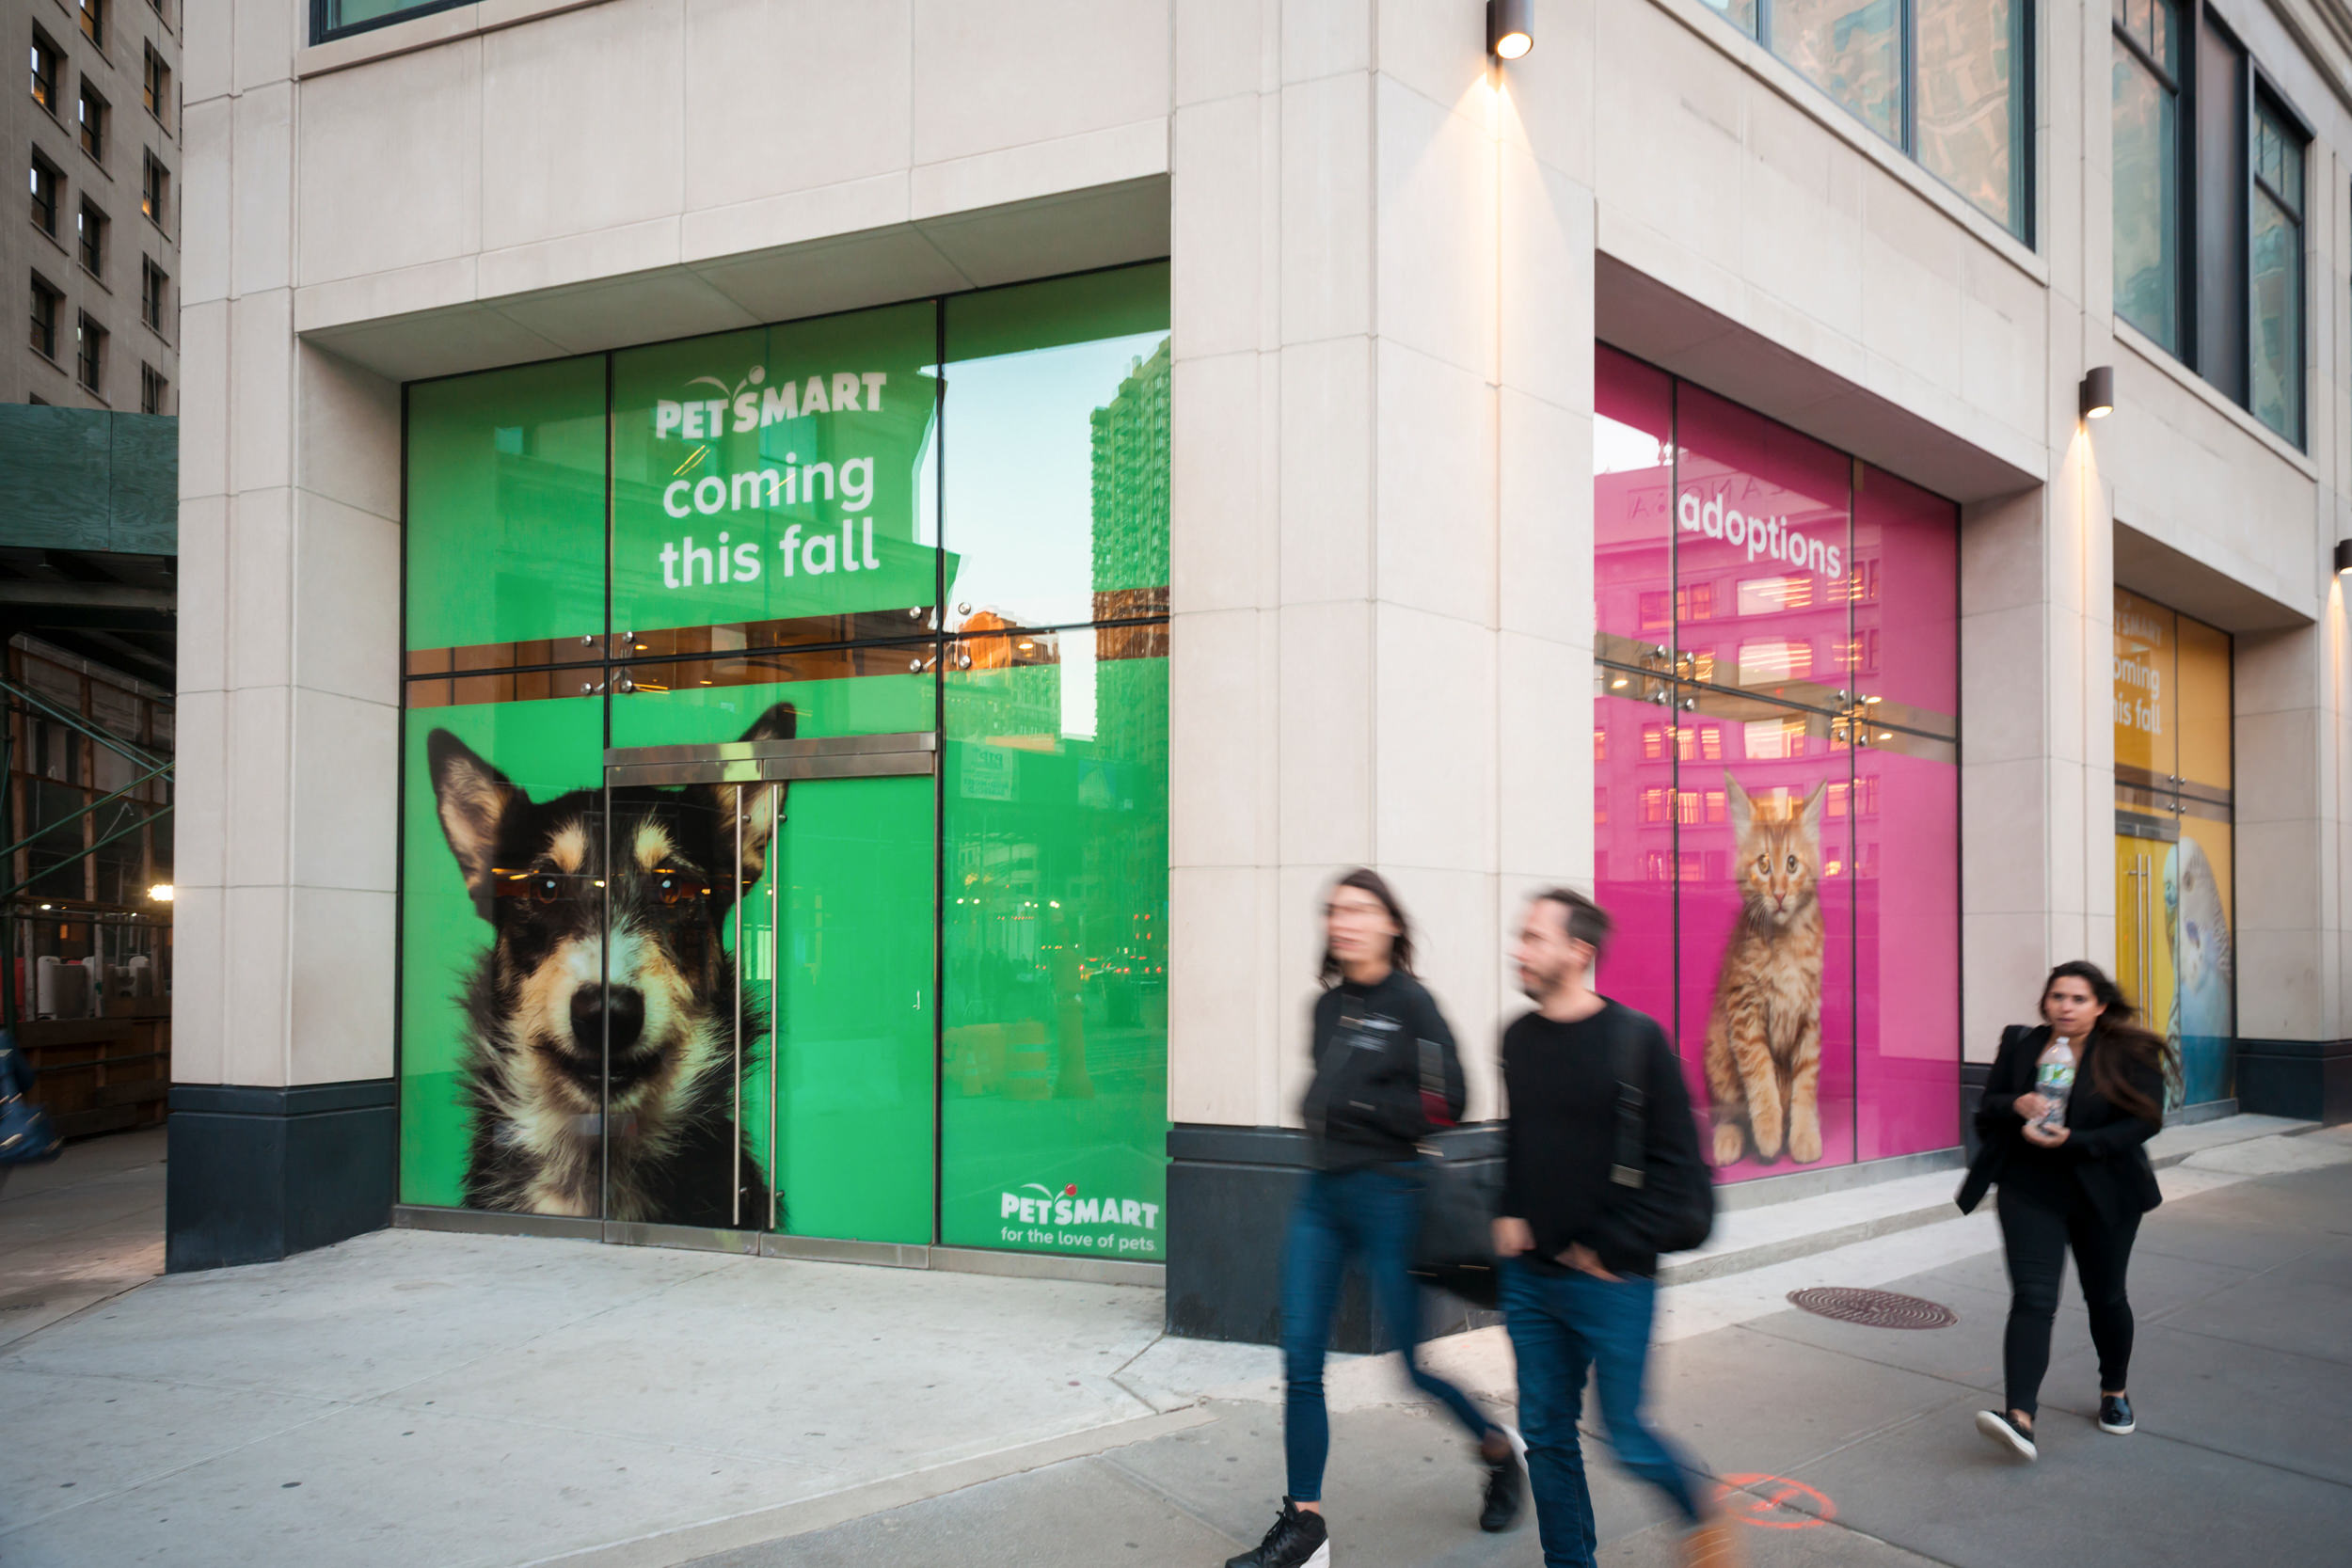 The future home of a Petsmart pet supply store in the Flatiron neighborhood of New York on Tuesday, April 18, 2017.